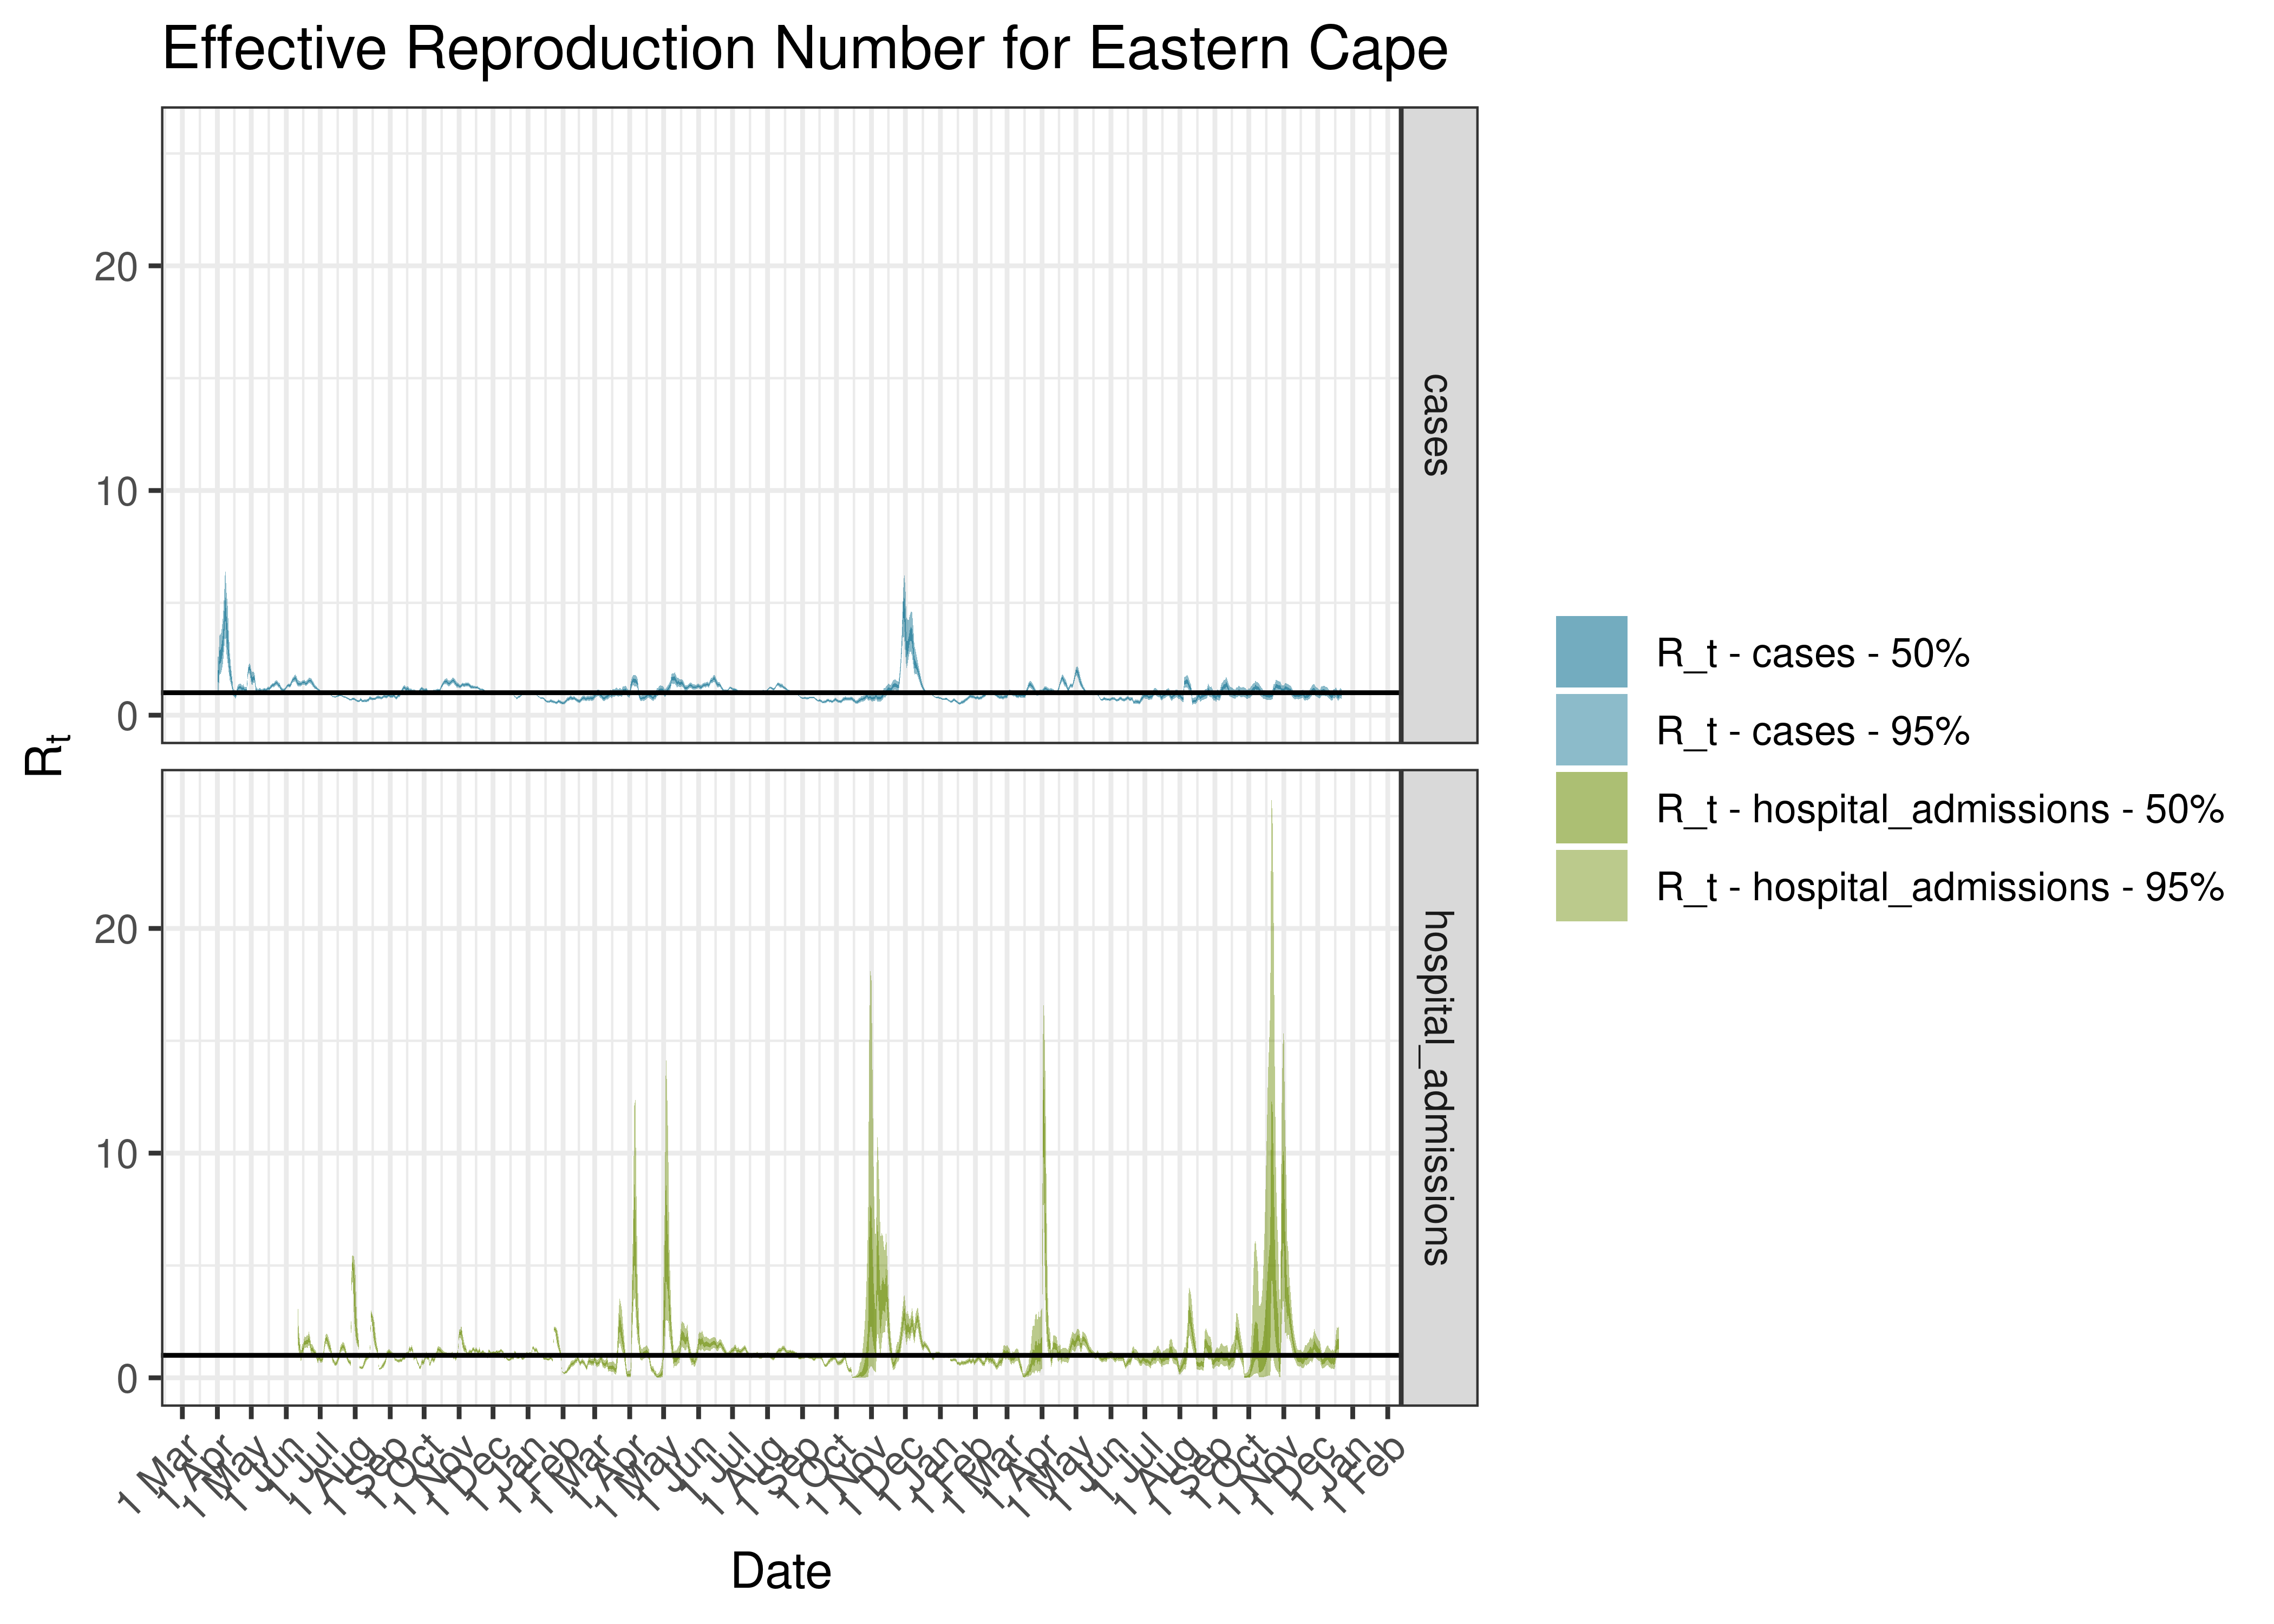 Estimated Effective Reproduction Number for Eastern Cape since 1 April 2020